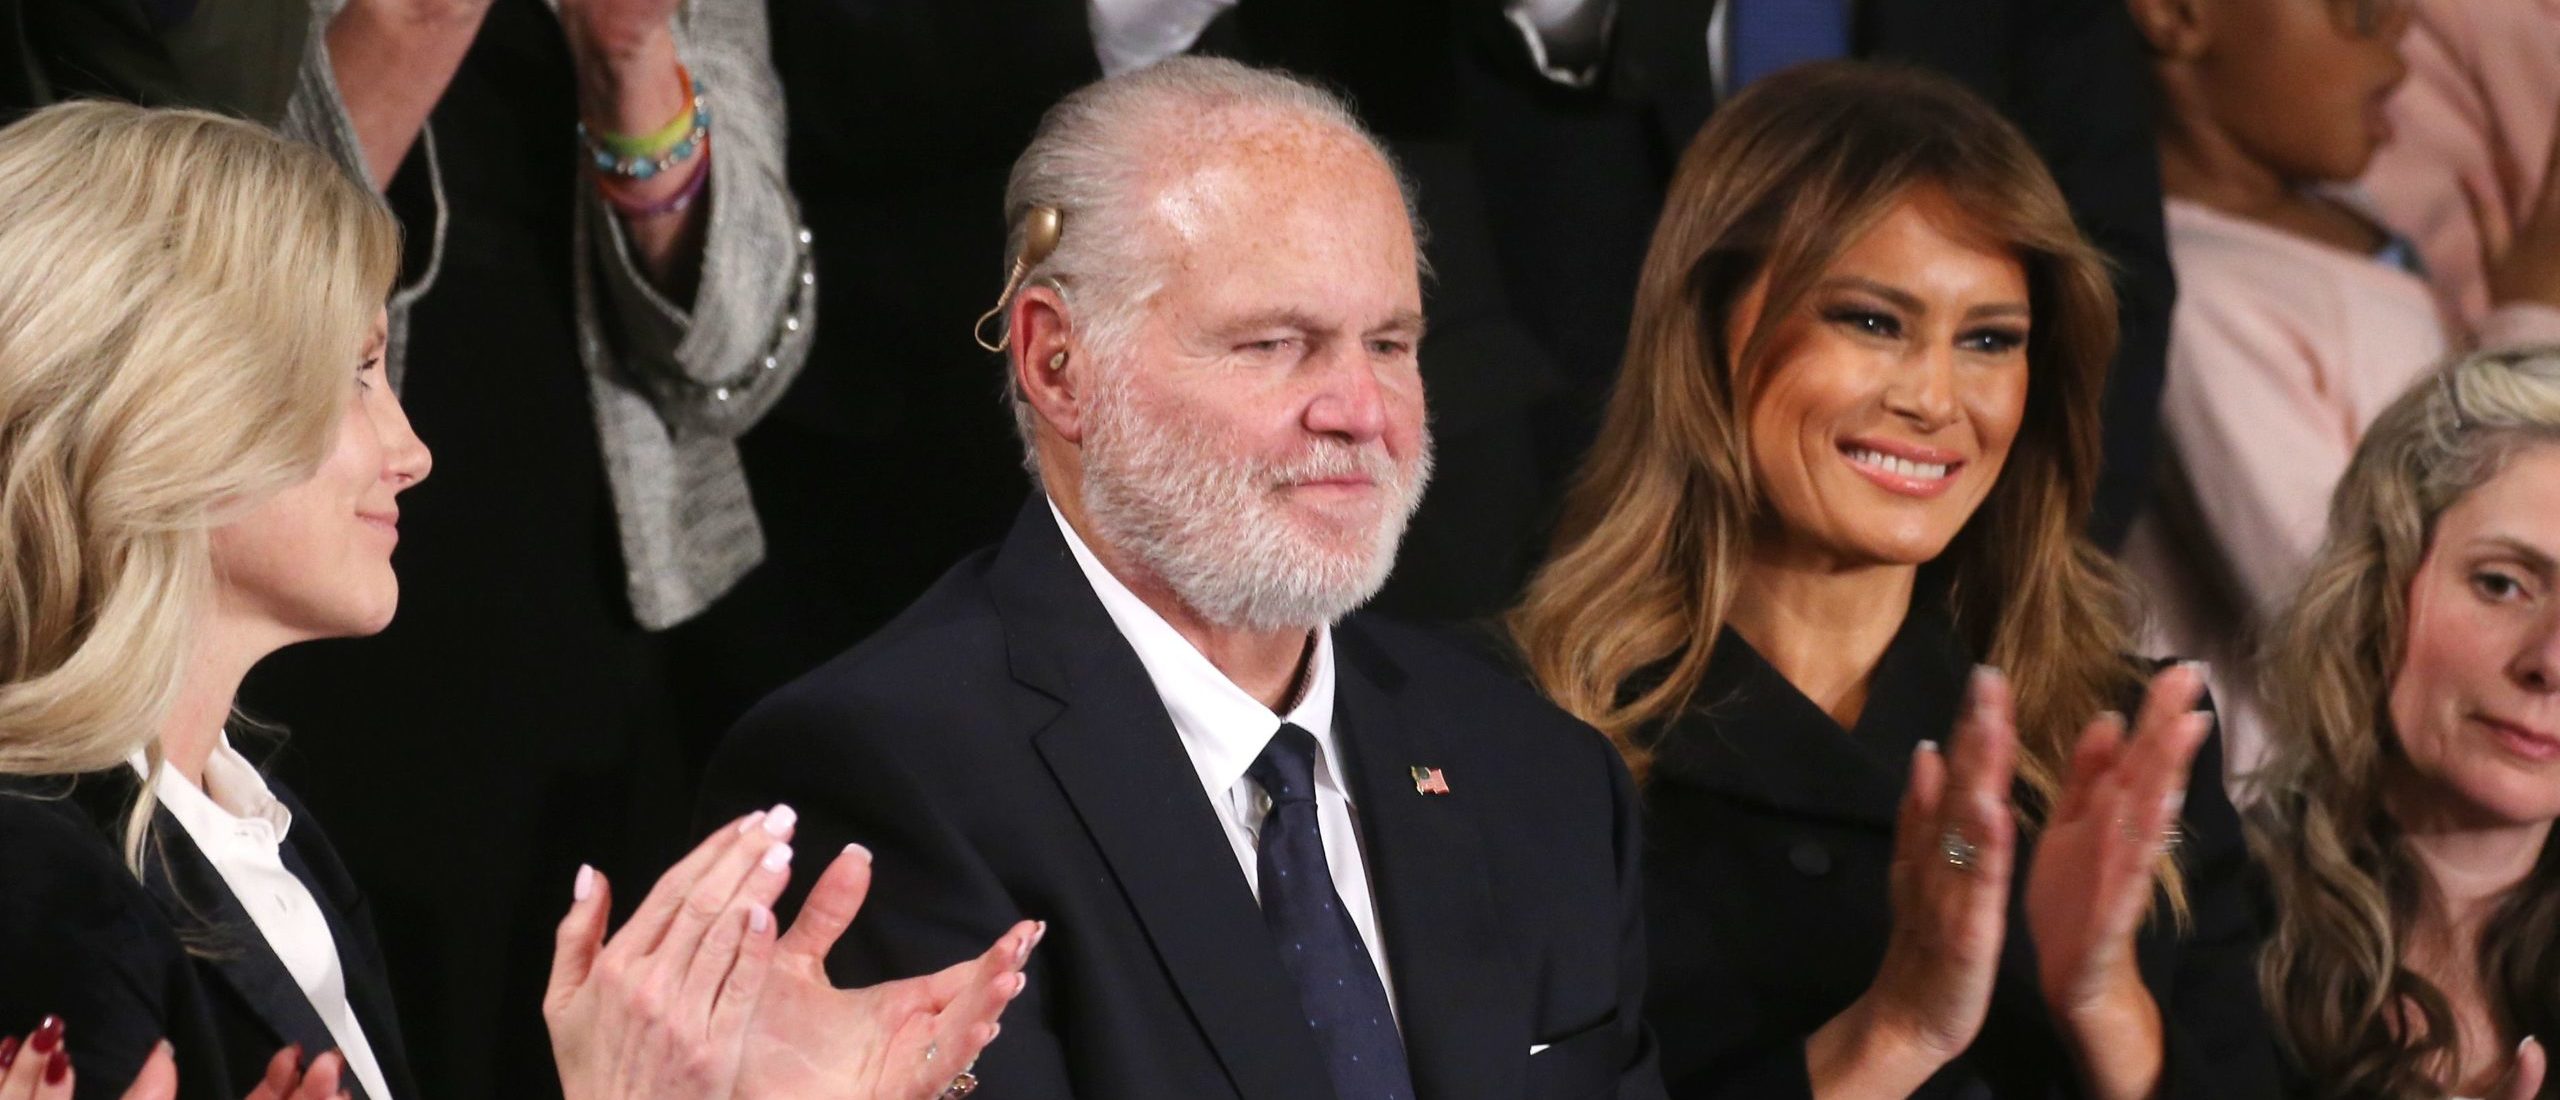 Radio personality Rush Limbaugh and wife Kathryn, left, attend the State of the Union address with first lady Melania Trump in the chamber of the U.S. House of Representatives on Feb. 4, 2020, in Washington, D.C. (Mario Tama/Getty Images/TNS)